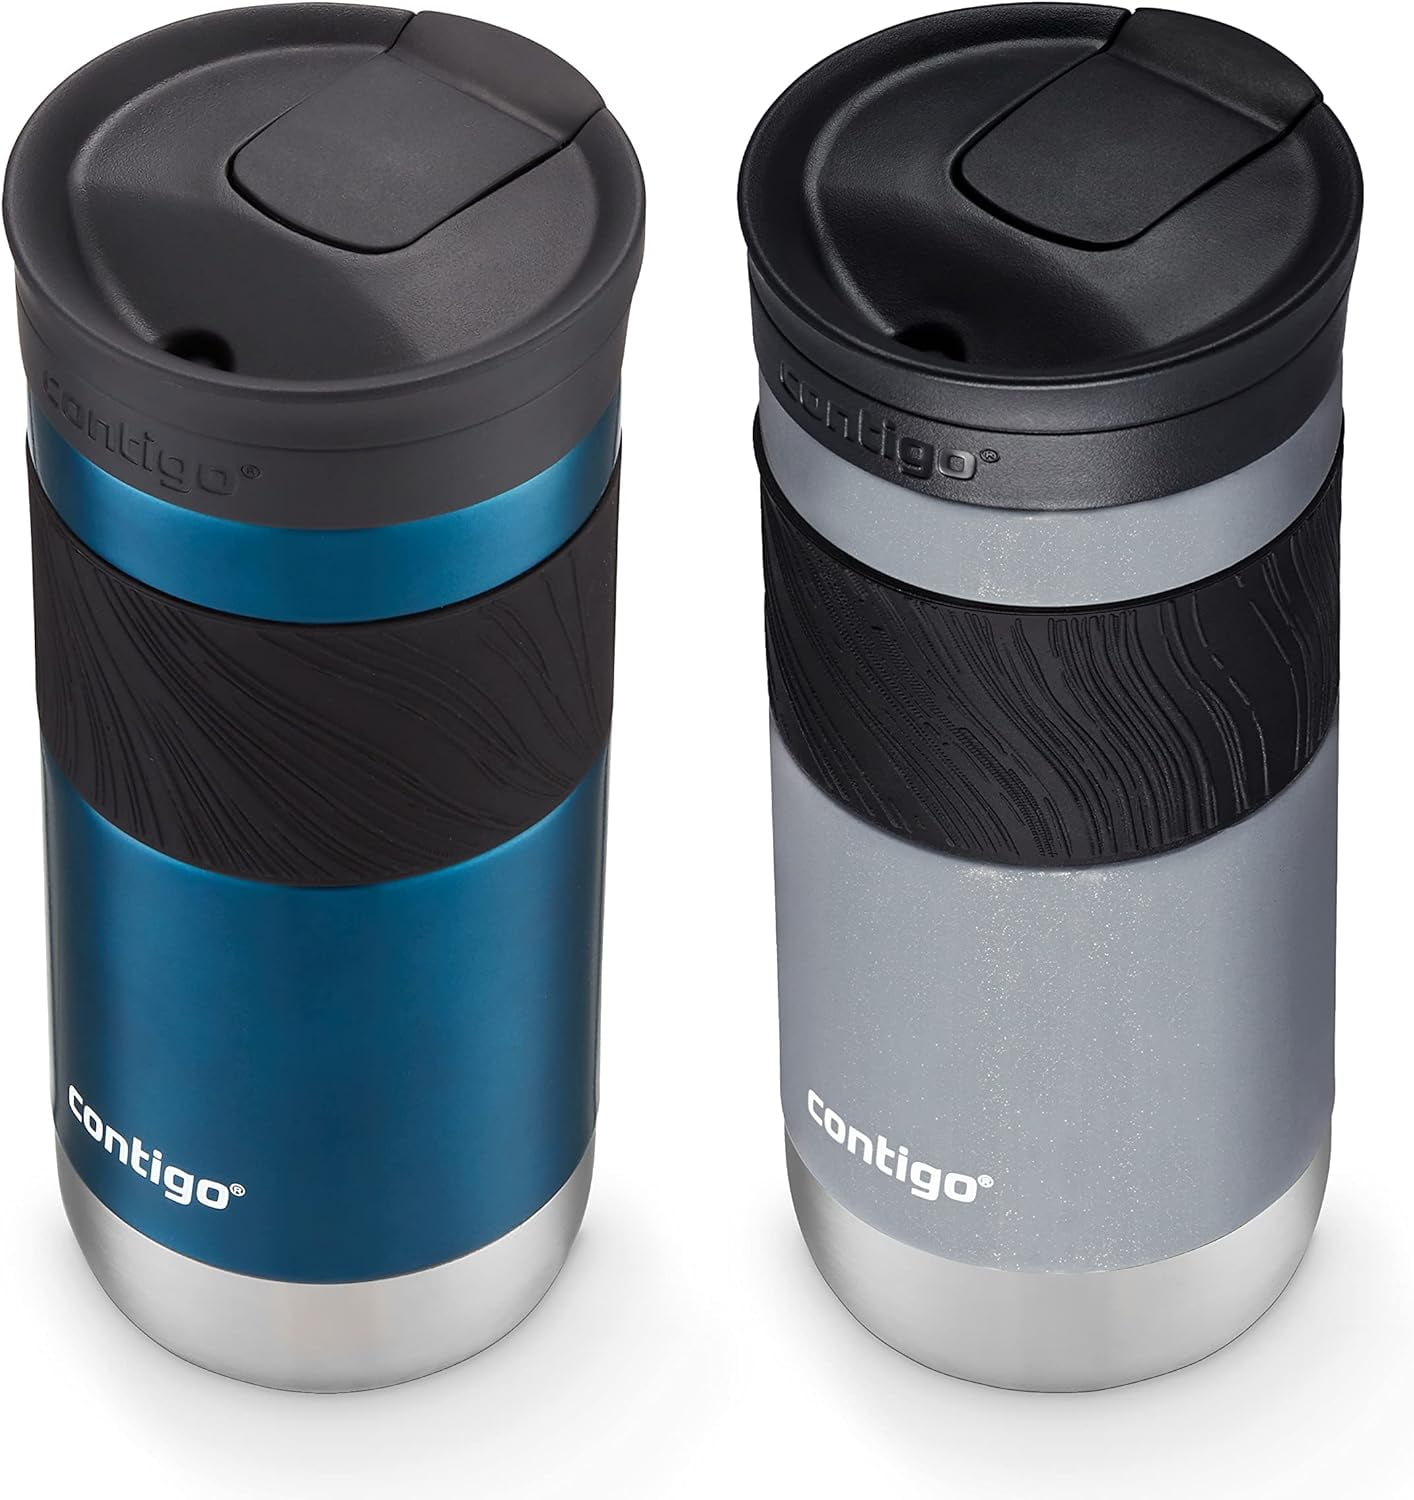 More than 70,000  shoppers rave about this Contigo travel mug — and  it's 50% off